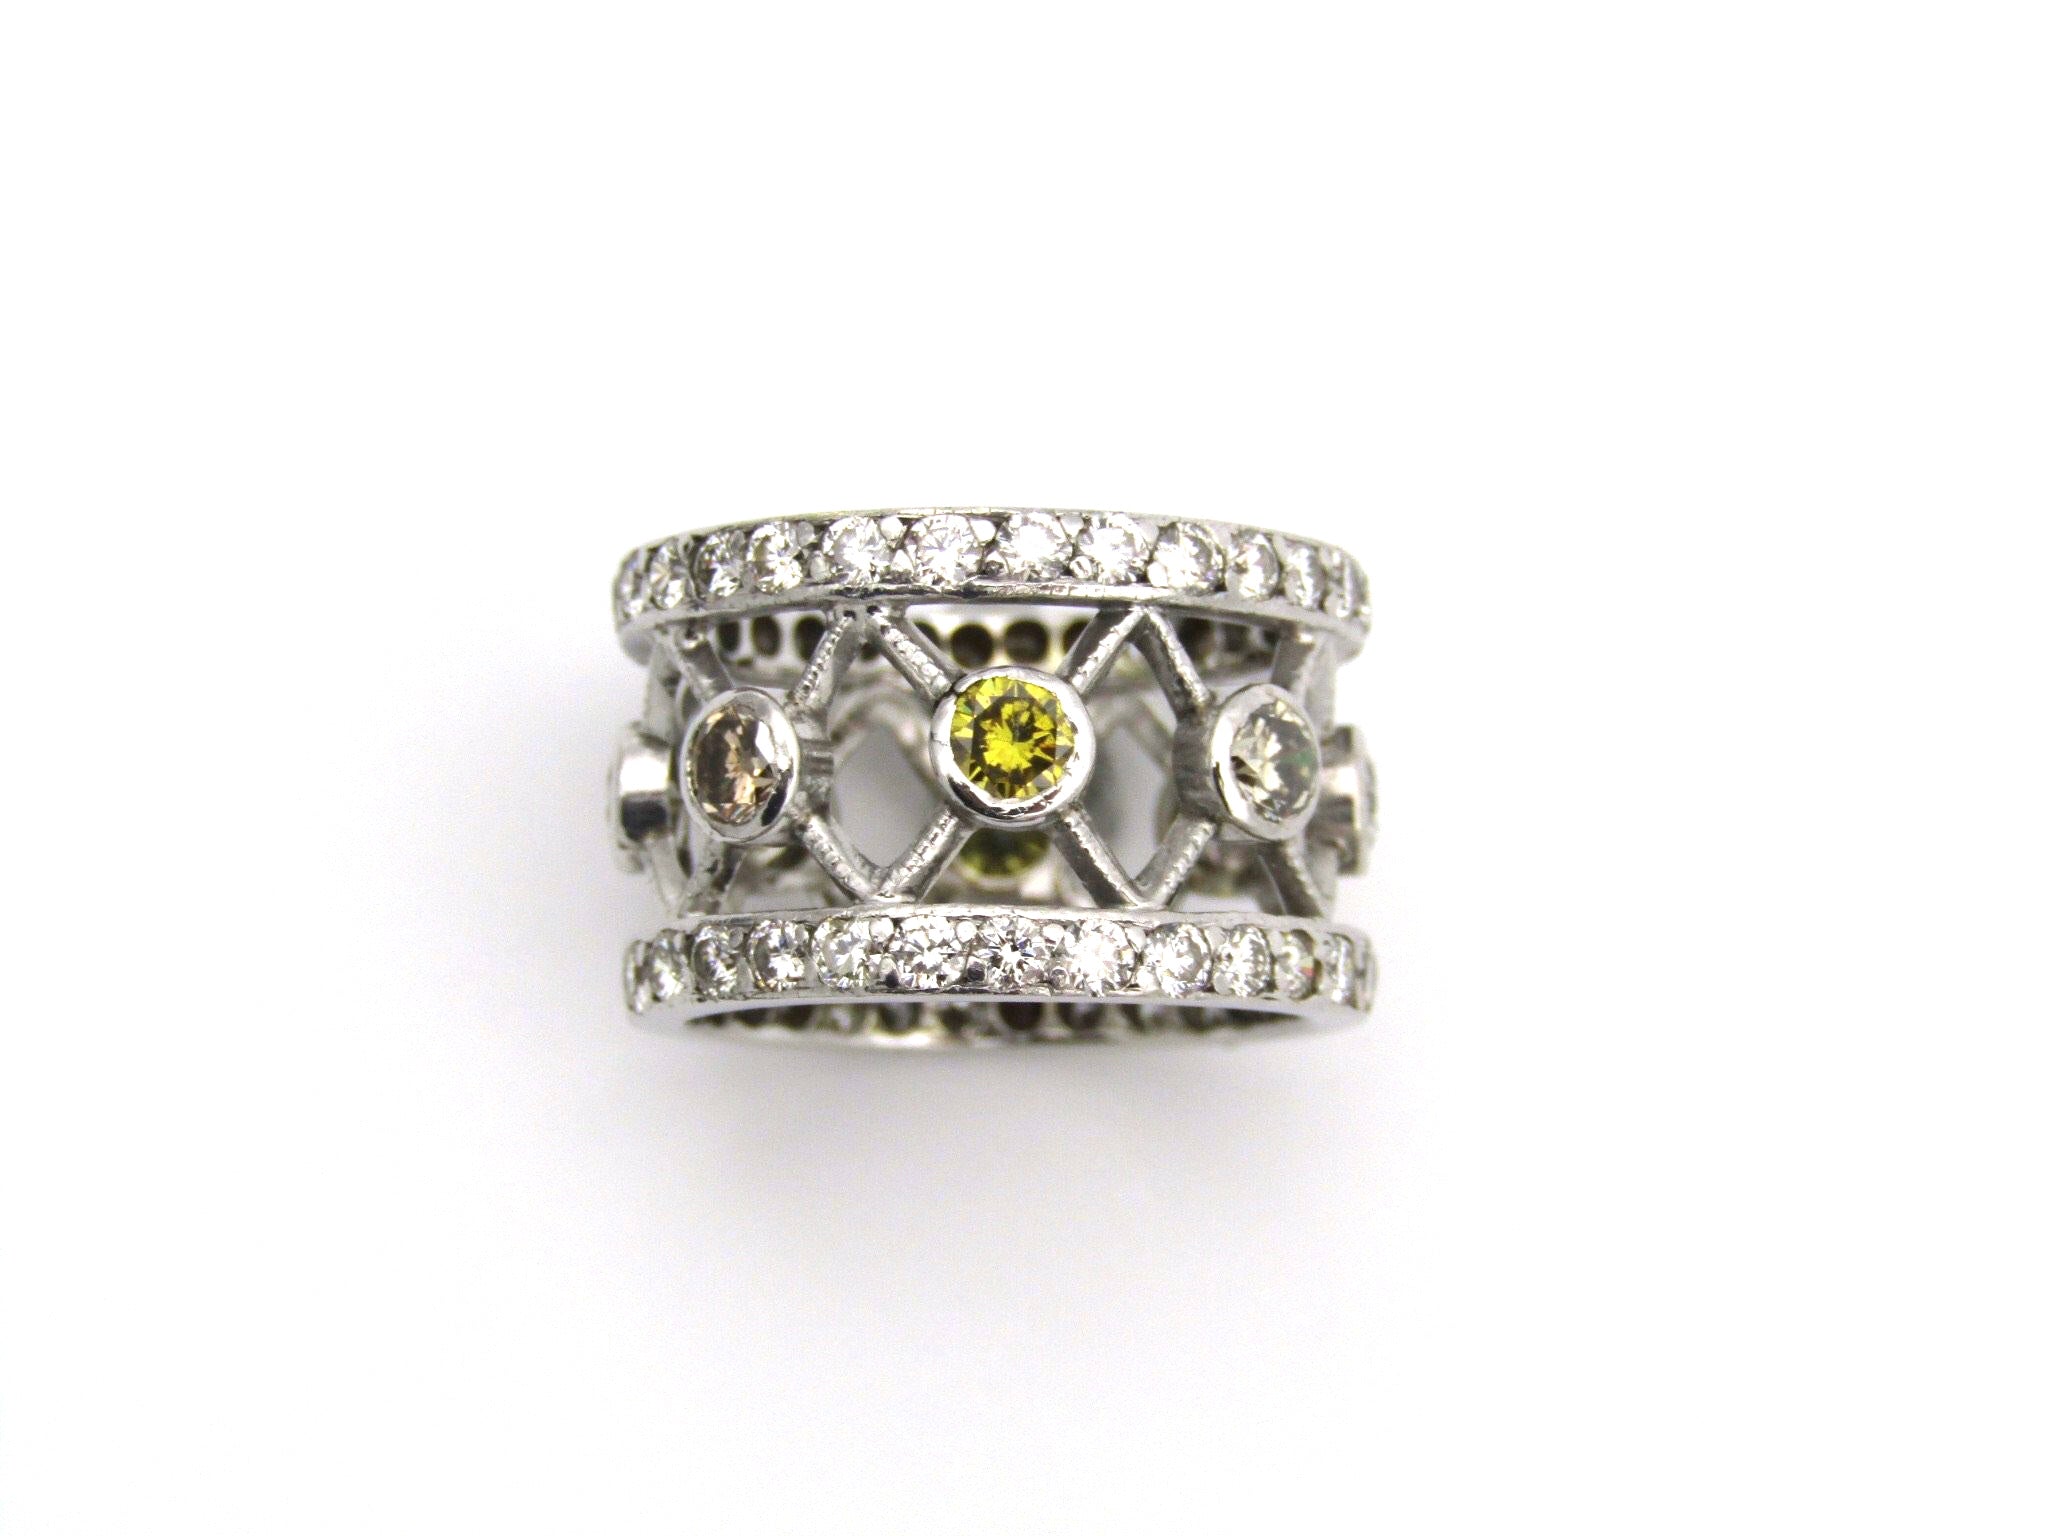 9kt gold fancy and colourless diamond ring.